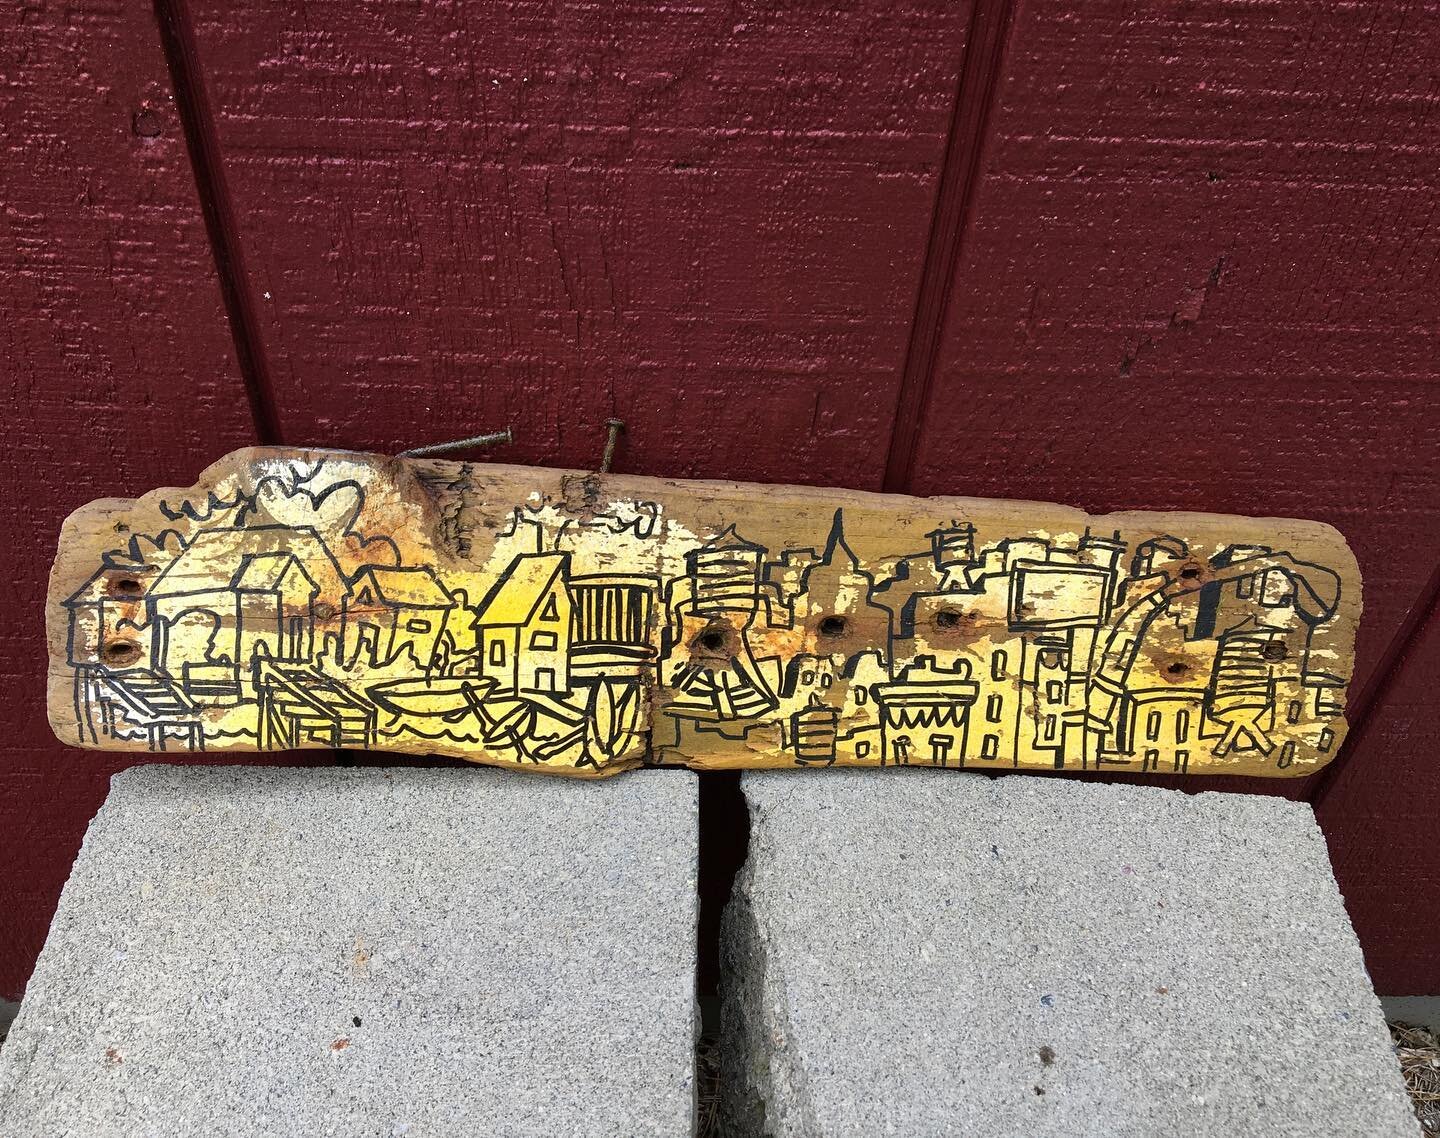 Serving up some fresh driftwood art on this unique piece. Love my time in this cool city of Belfast, Maine.

Drifting Midcoast
16x4 / acrylic on found wood
$95, can ship anywhere
.
#belfastmaine #maineartist 
#midcoastmaine  #driftwoodart #foundmater